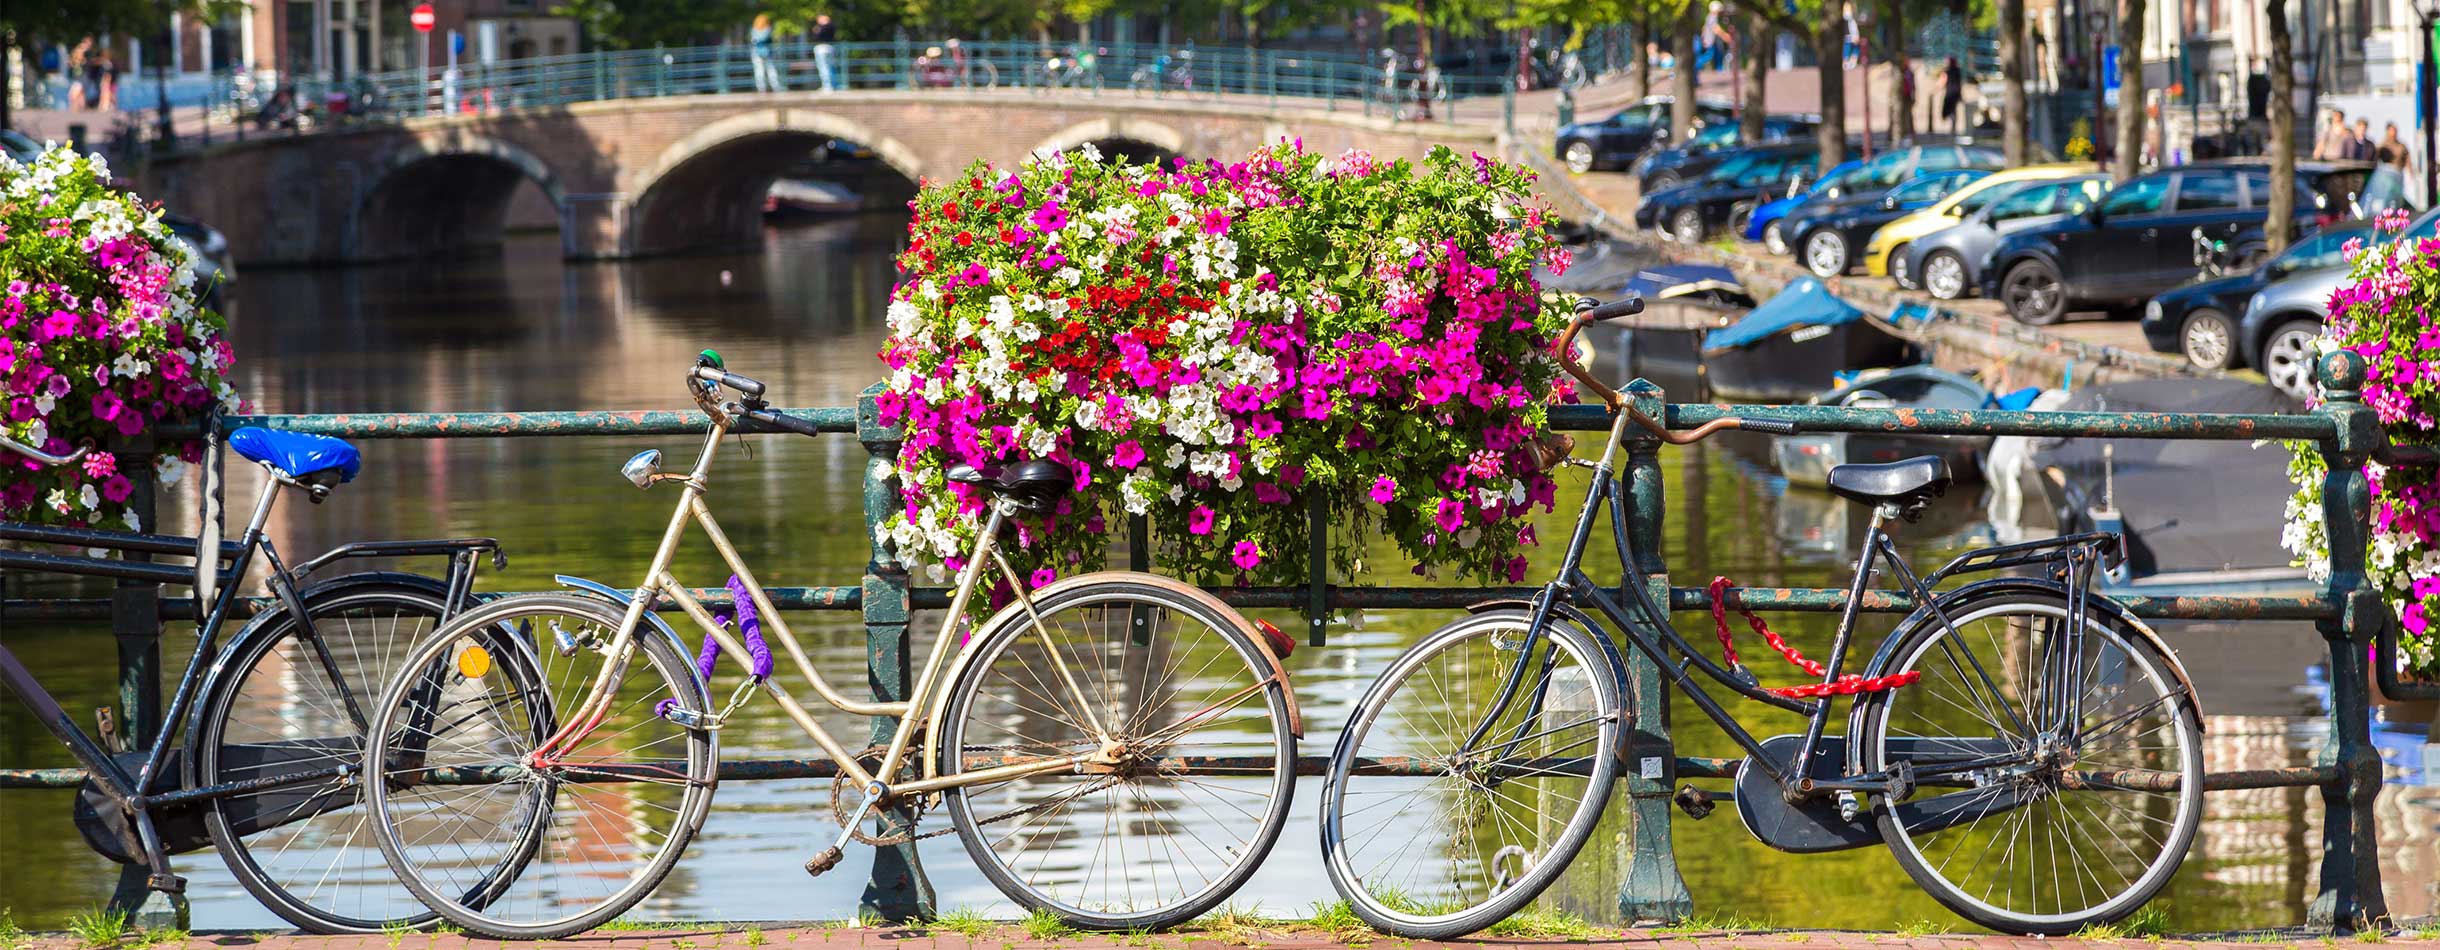 Bicycles over the bridge, canal, Amsterdam, Netherlands